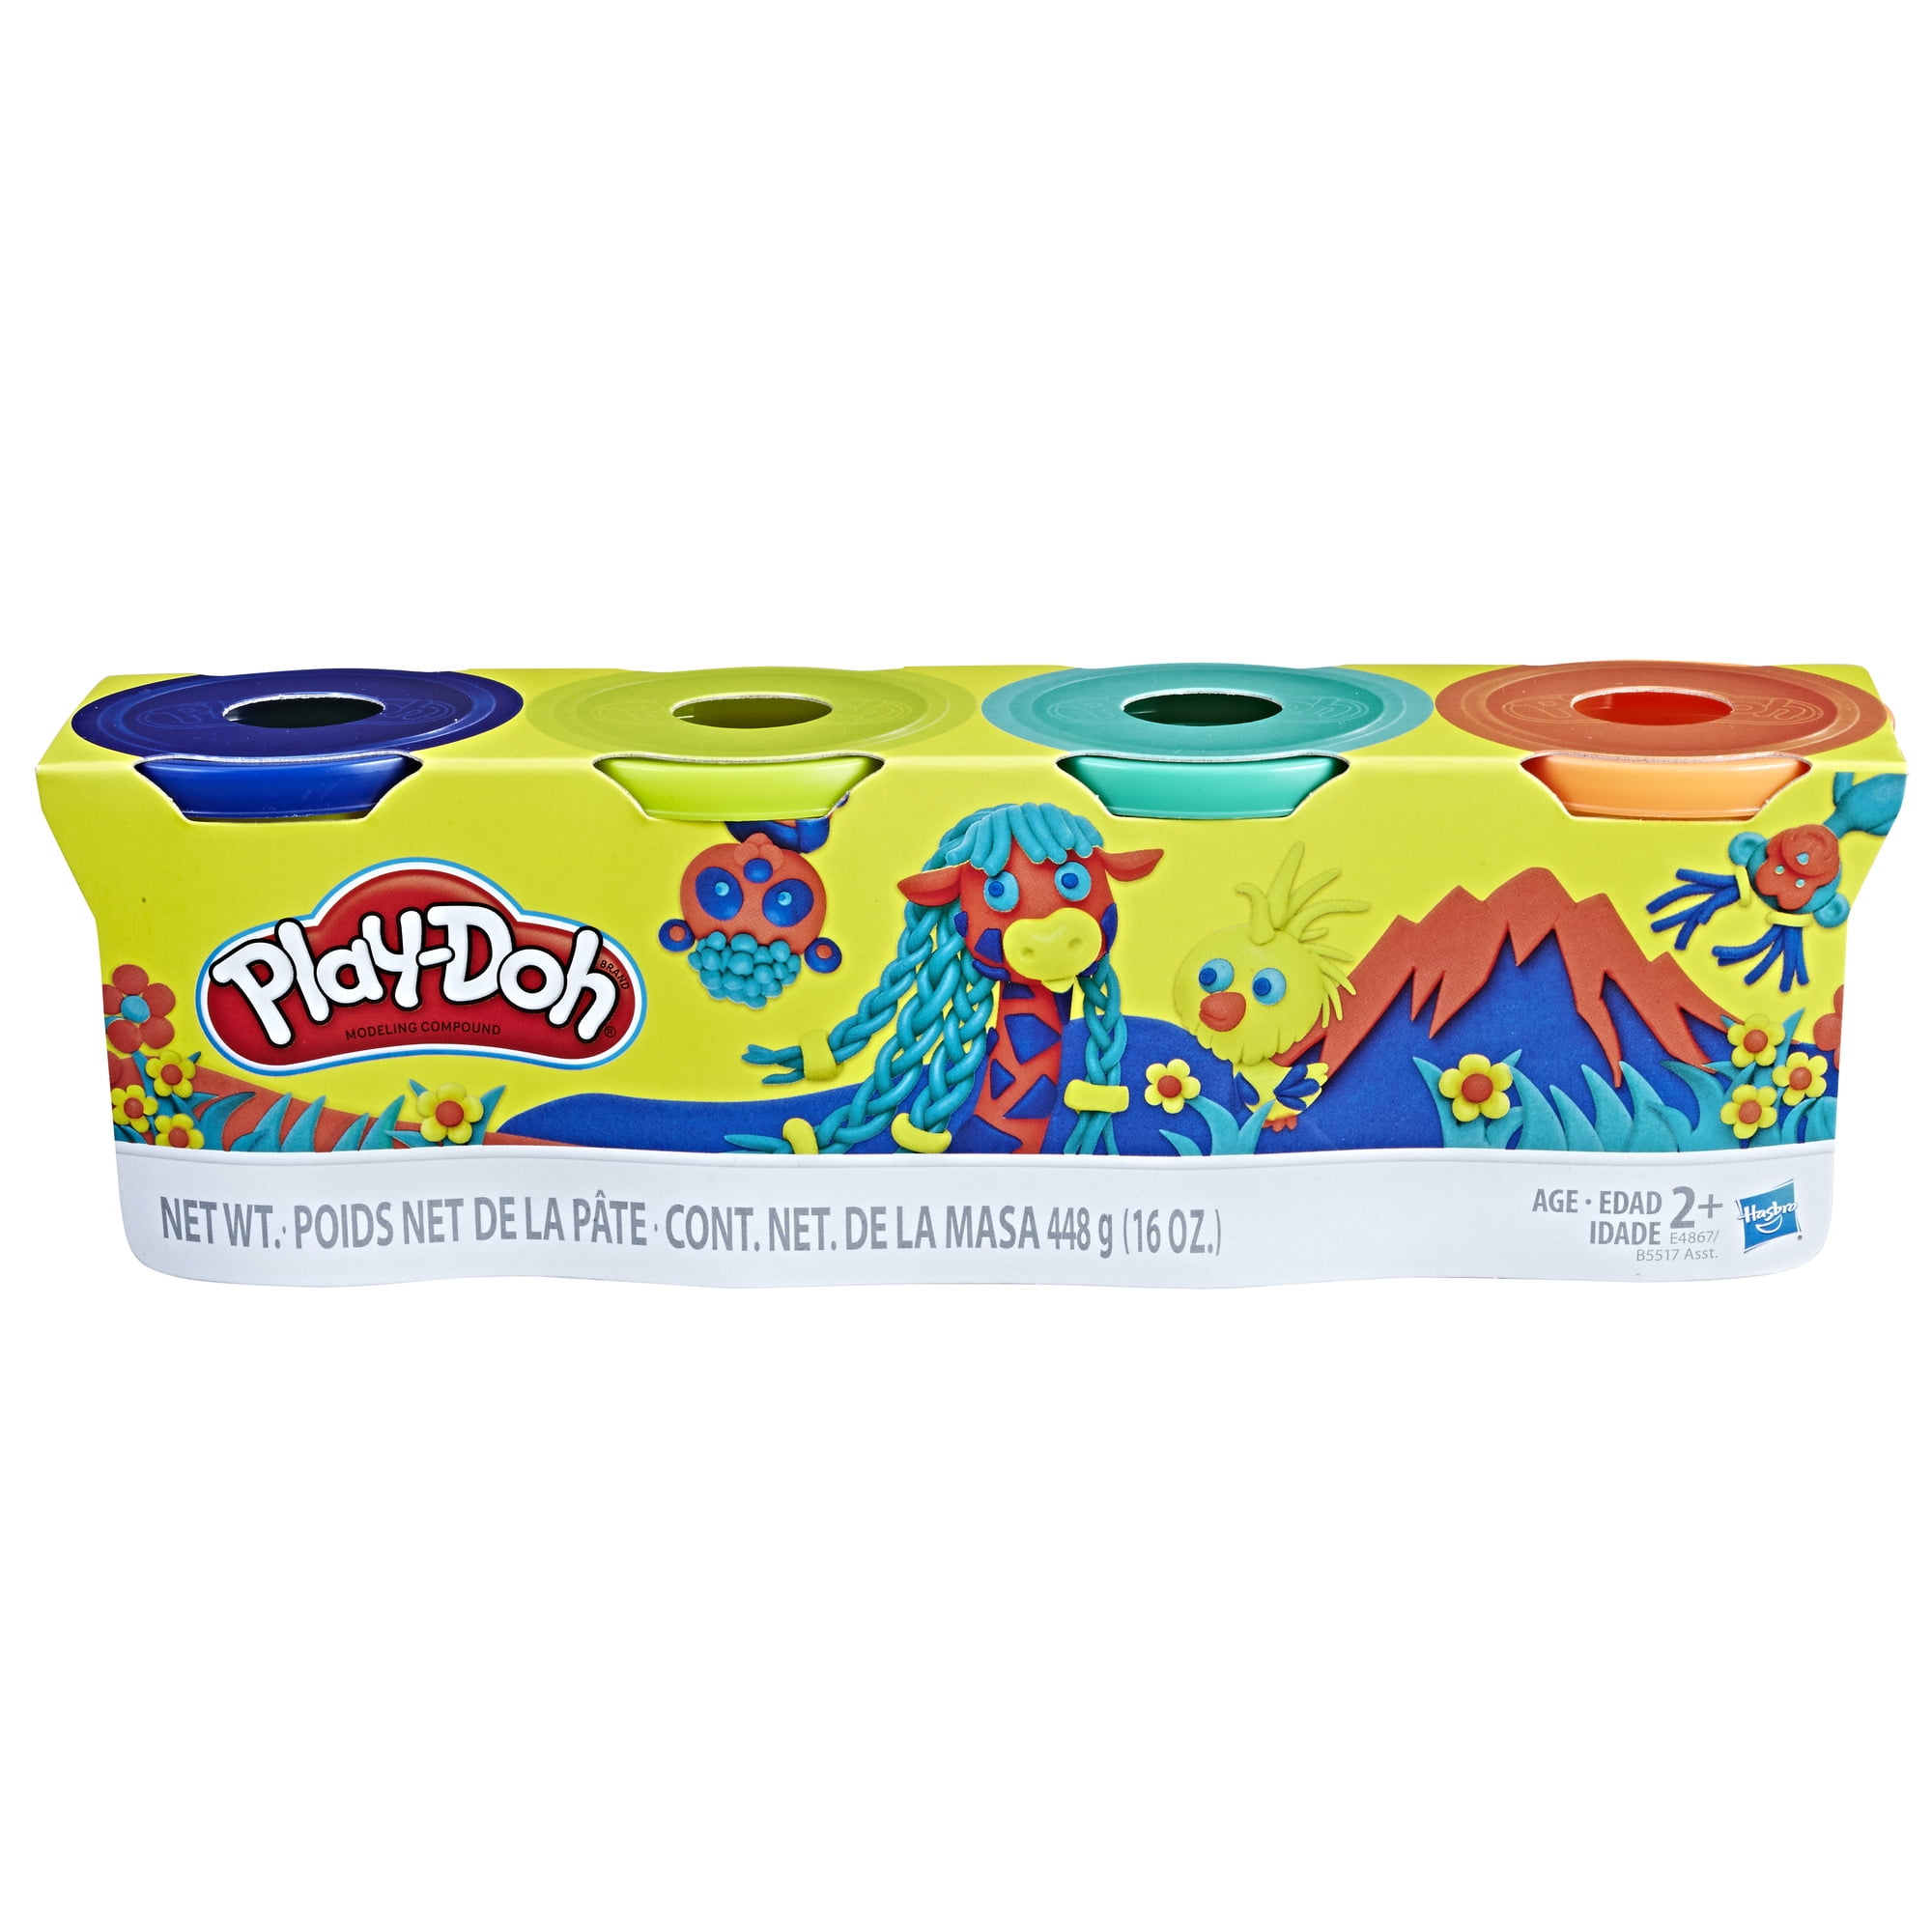 Play-Doh Ultimate Color Collection, 1 Oz Fun Size Cans 65-Pack of